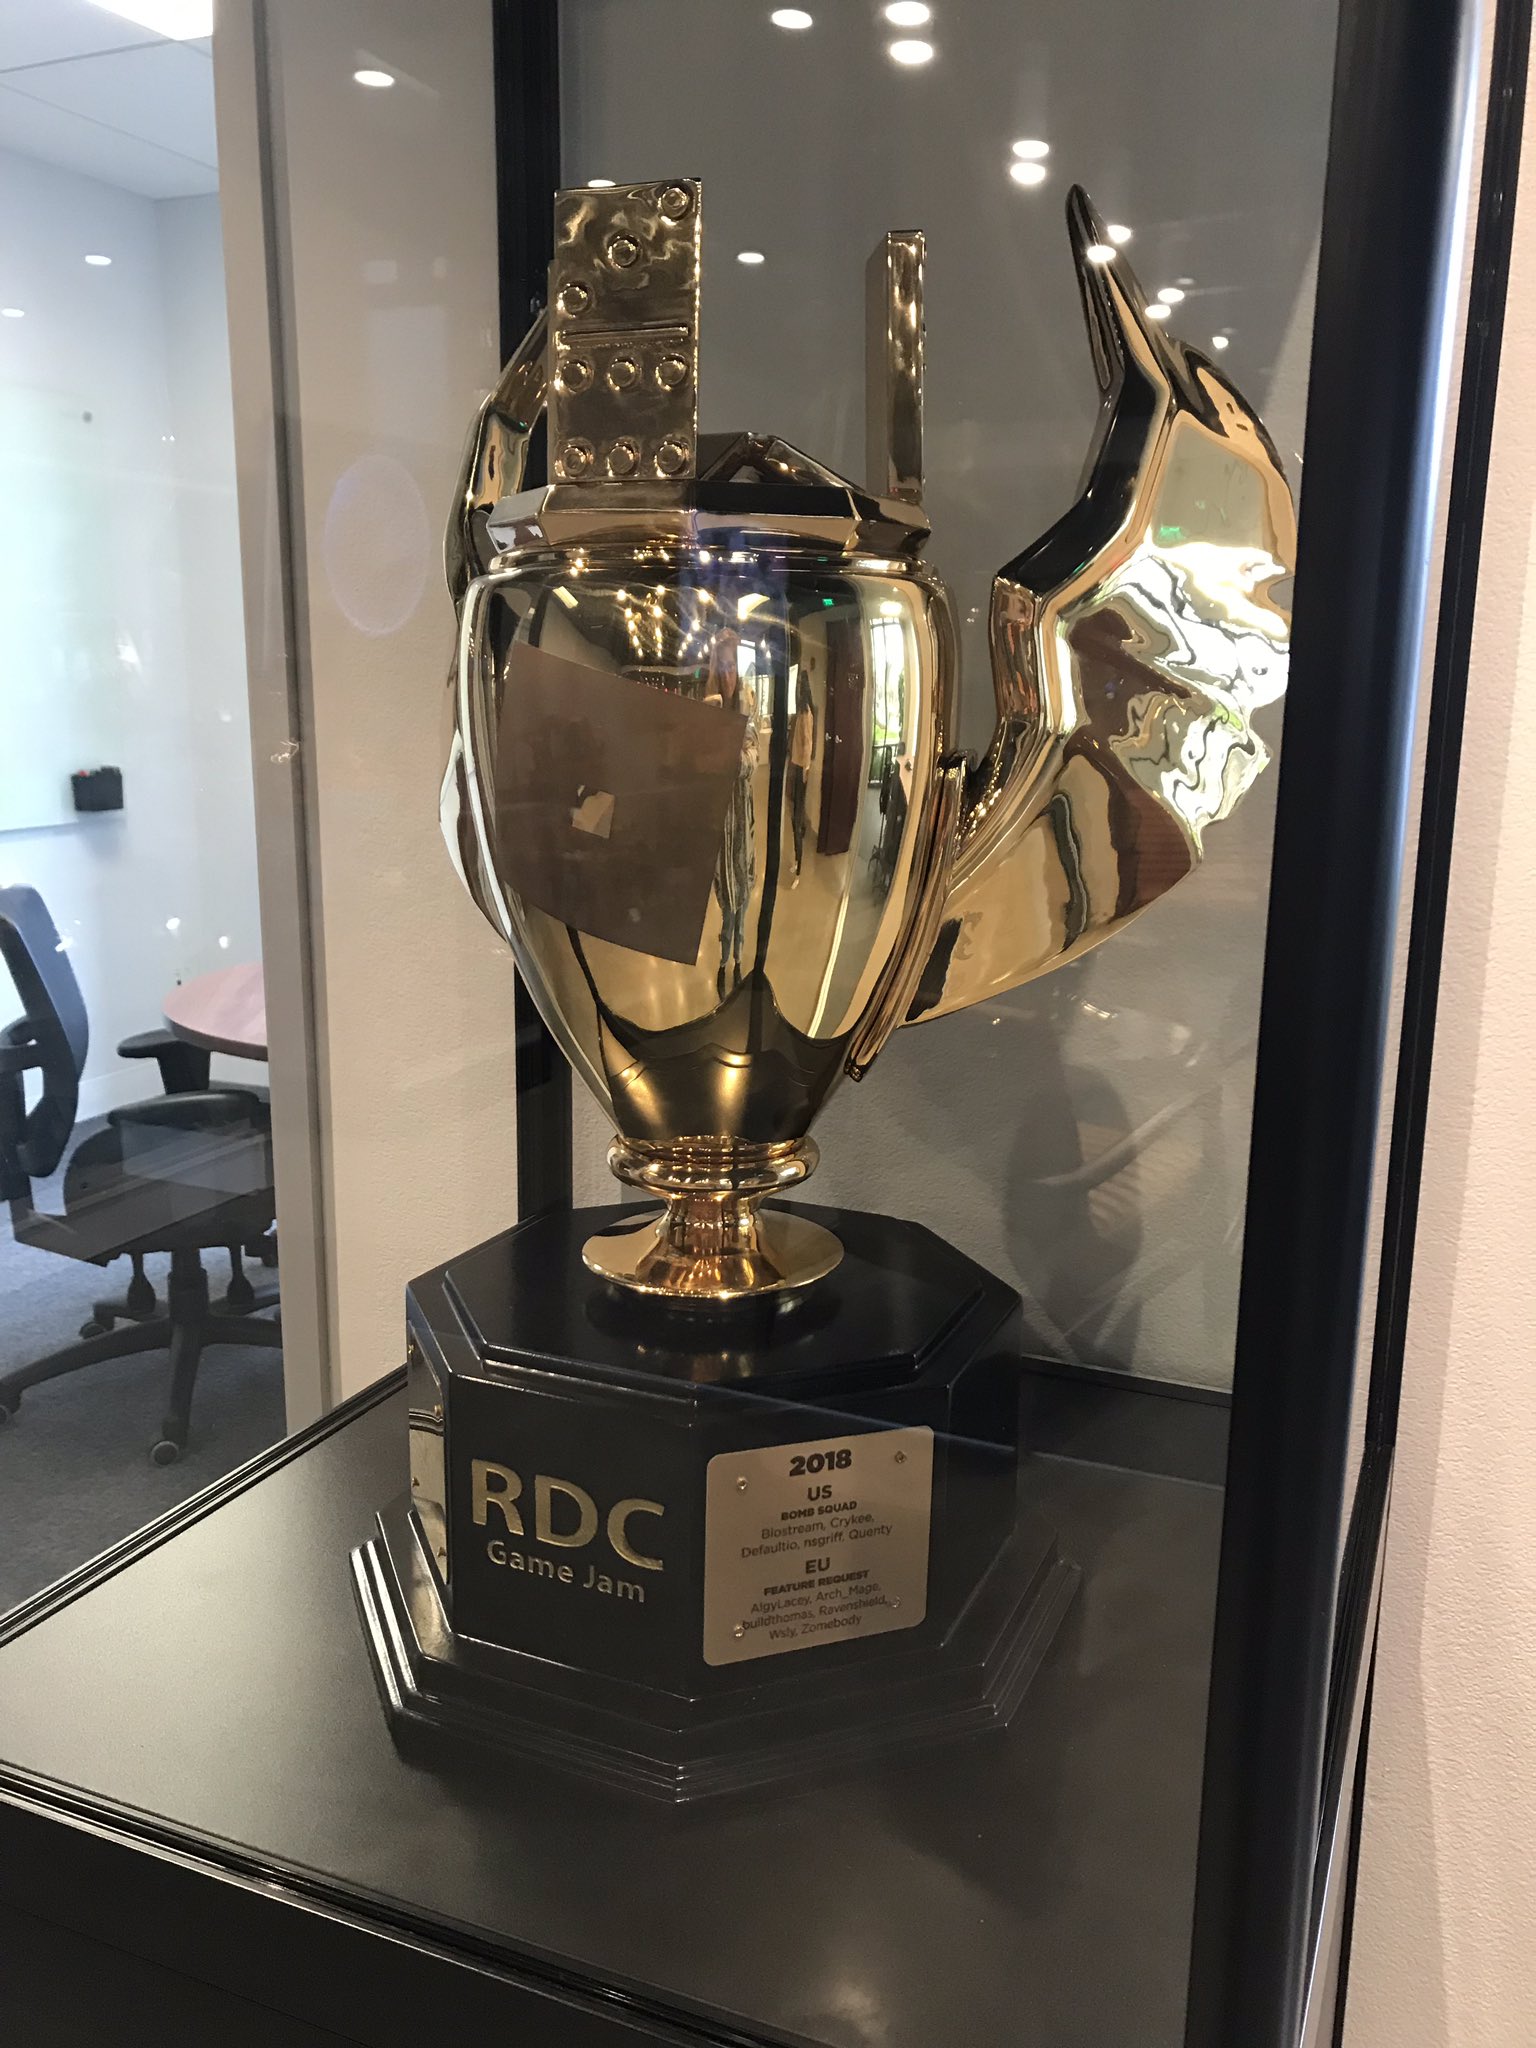 Roblox Developer Relations On Twitter Next Time You Visit Roblox Hq Be Sure To Stop By The Lobby And Check Out The Rdc2018 Game Jam Trophy The Winners Have Their Names Inscribed - roblox developer relations on twitter daily rewards are a good